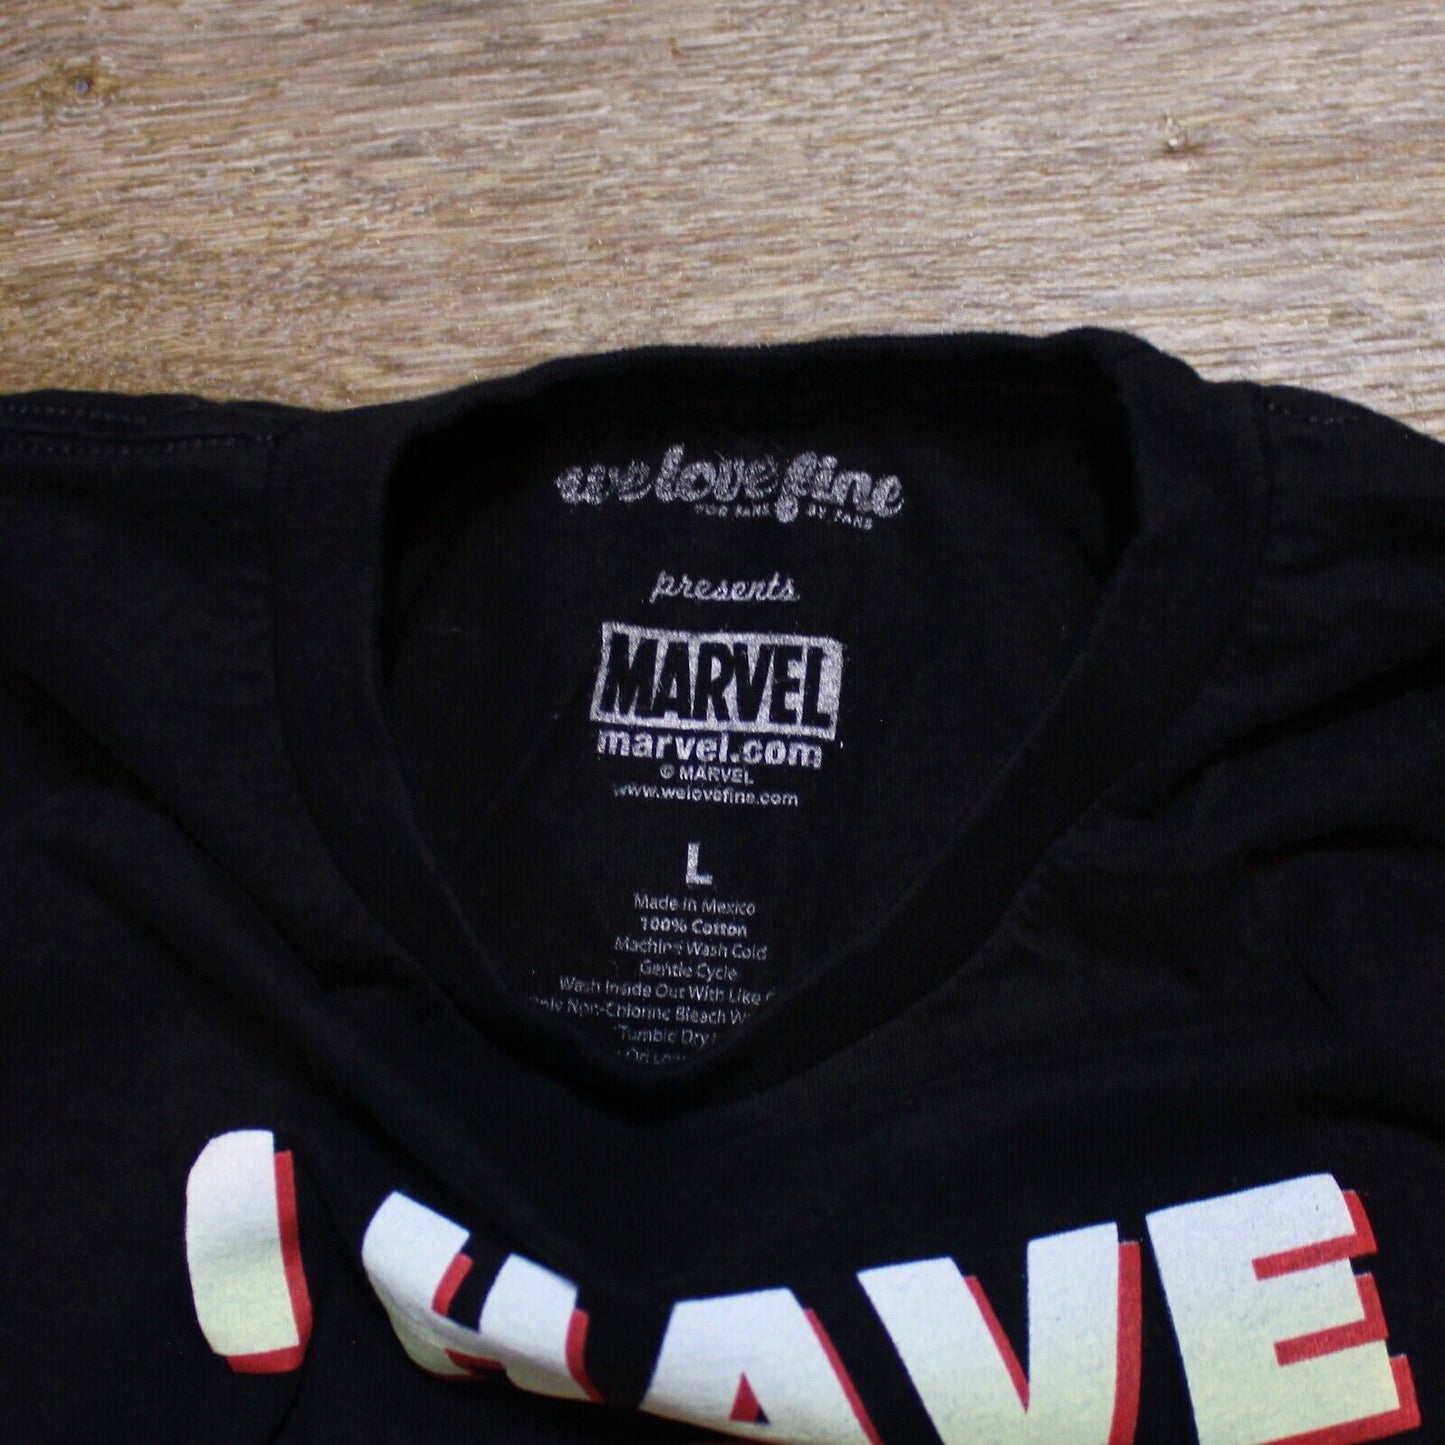 Marvel Deadpool I Have Issues Graphic Tee Shirt Black - Men's Large